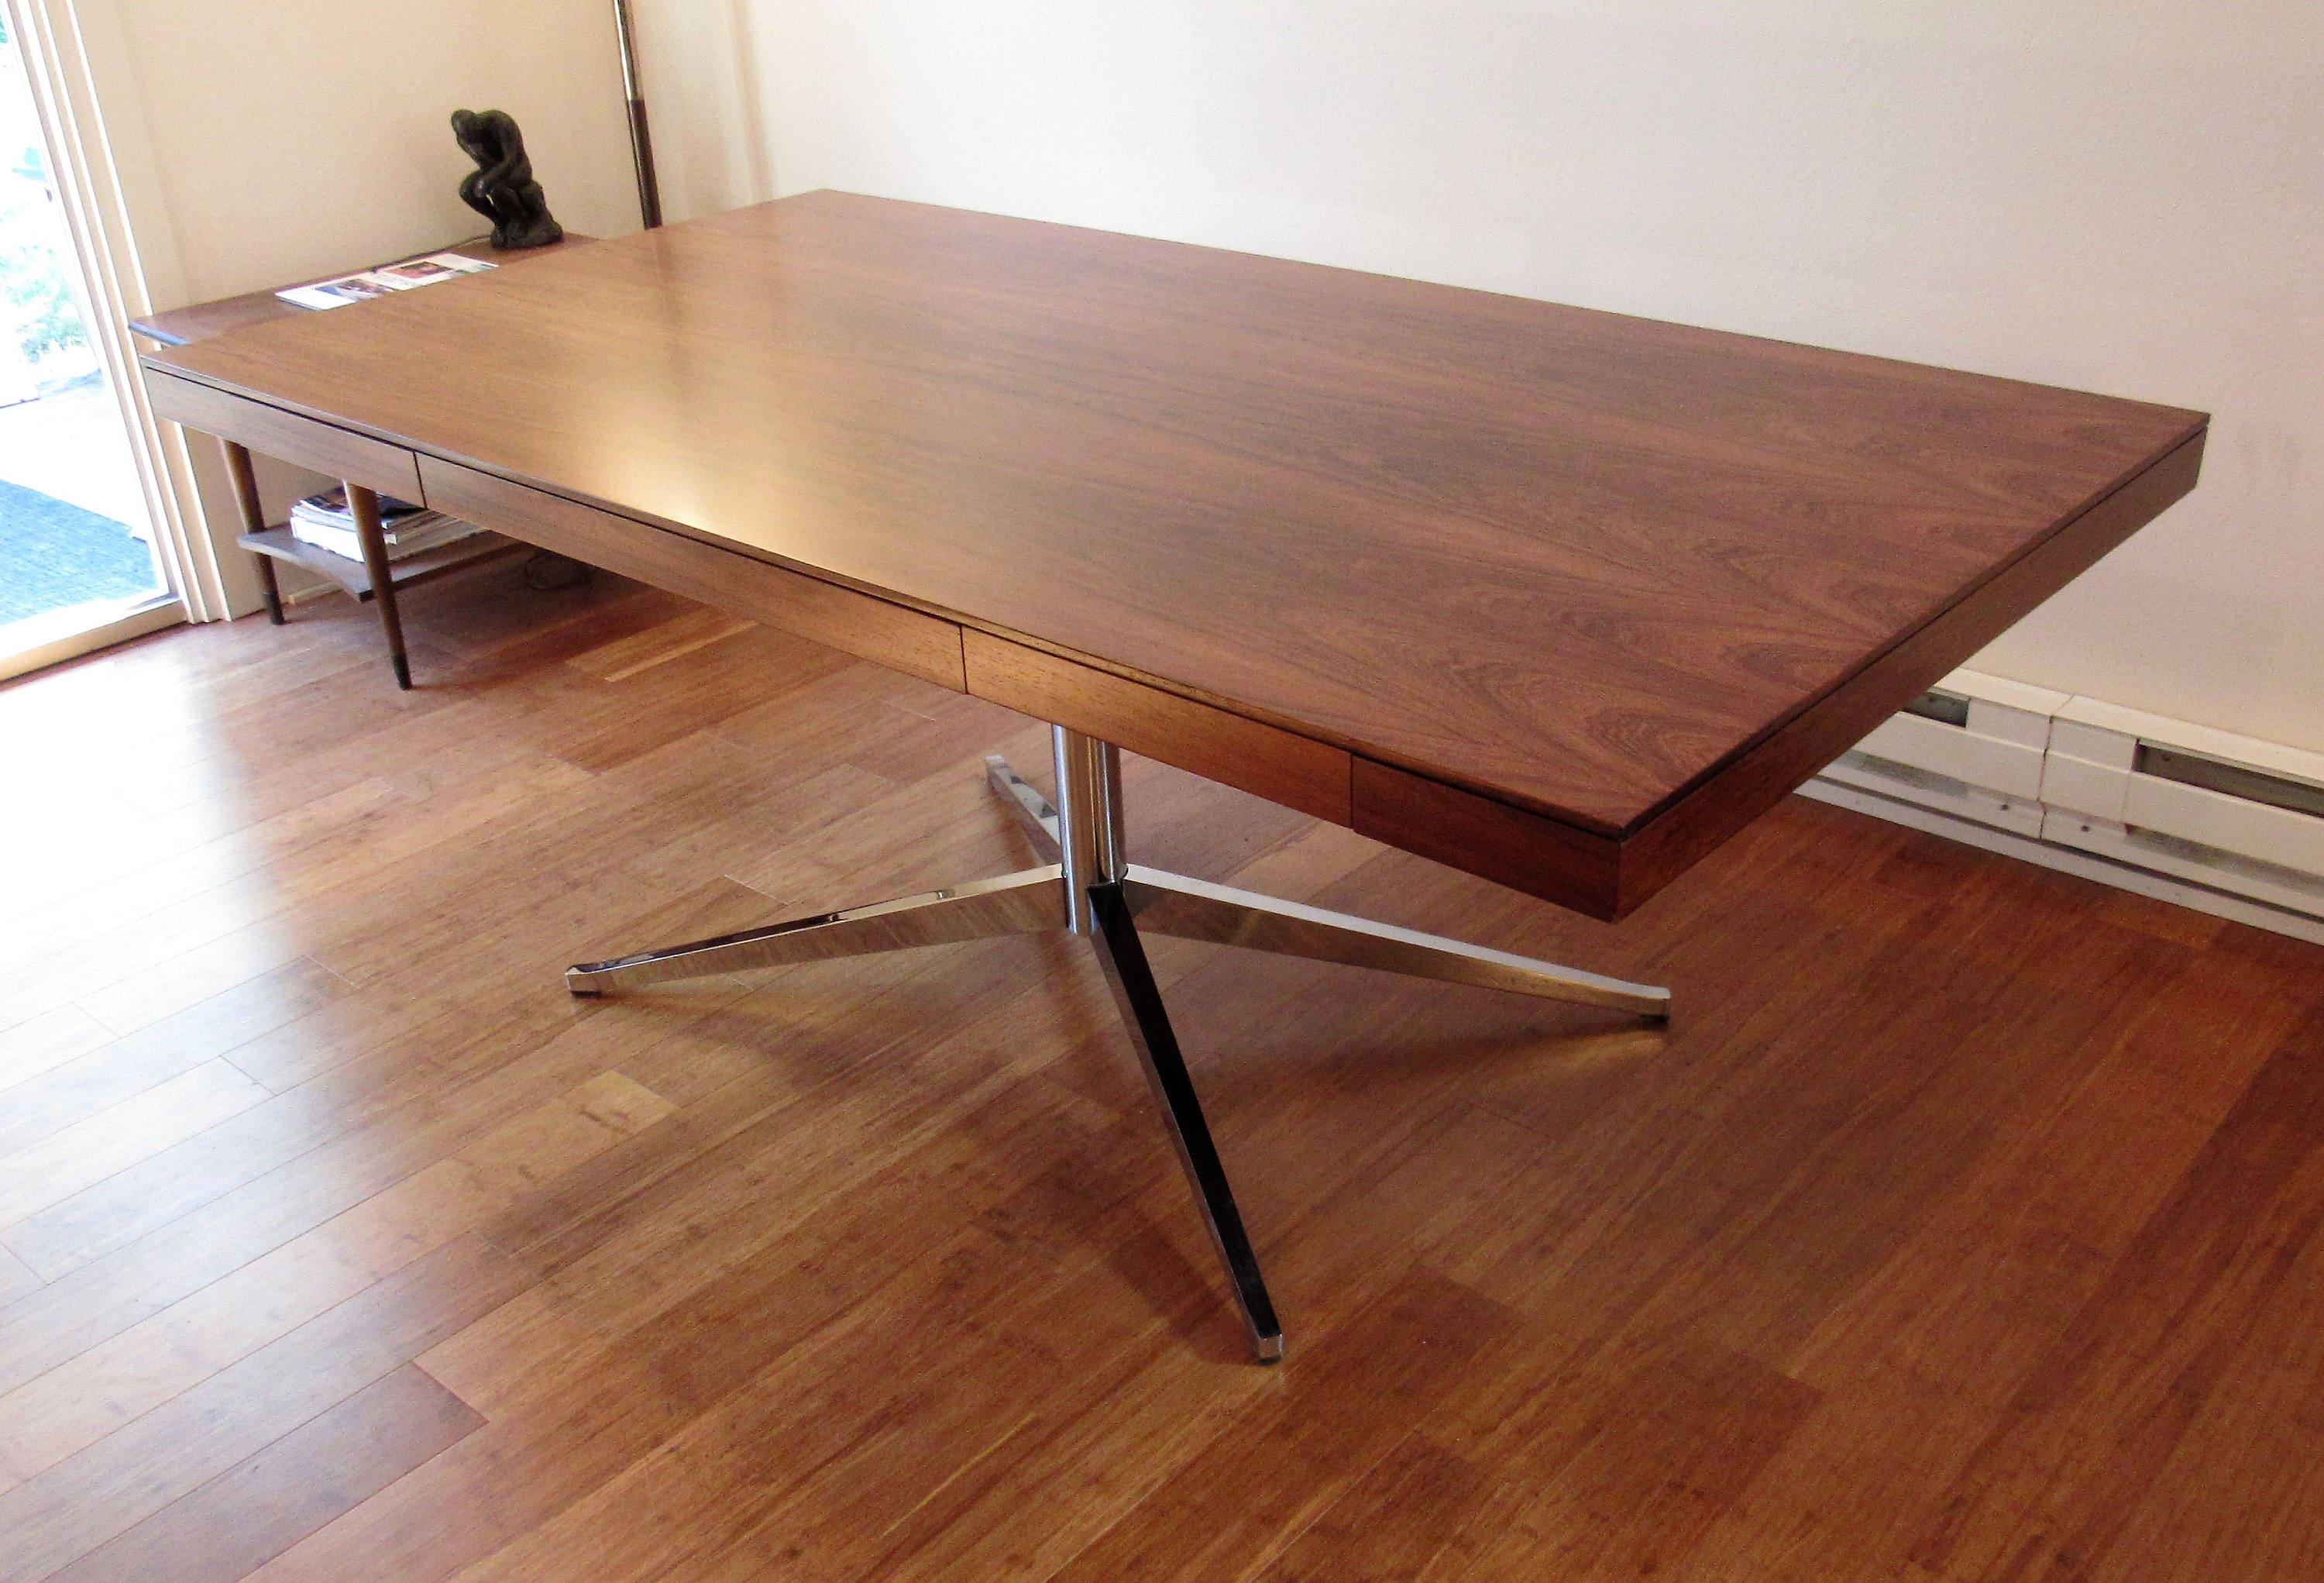 Vintage Florence Knoll Partners Desk Or Executive Table In